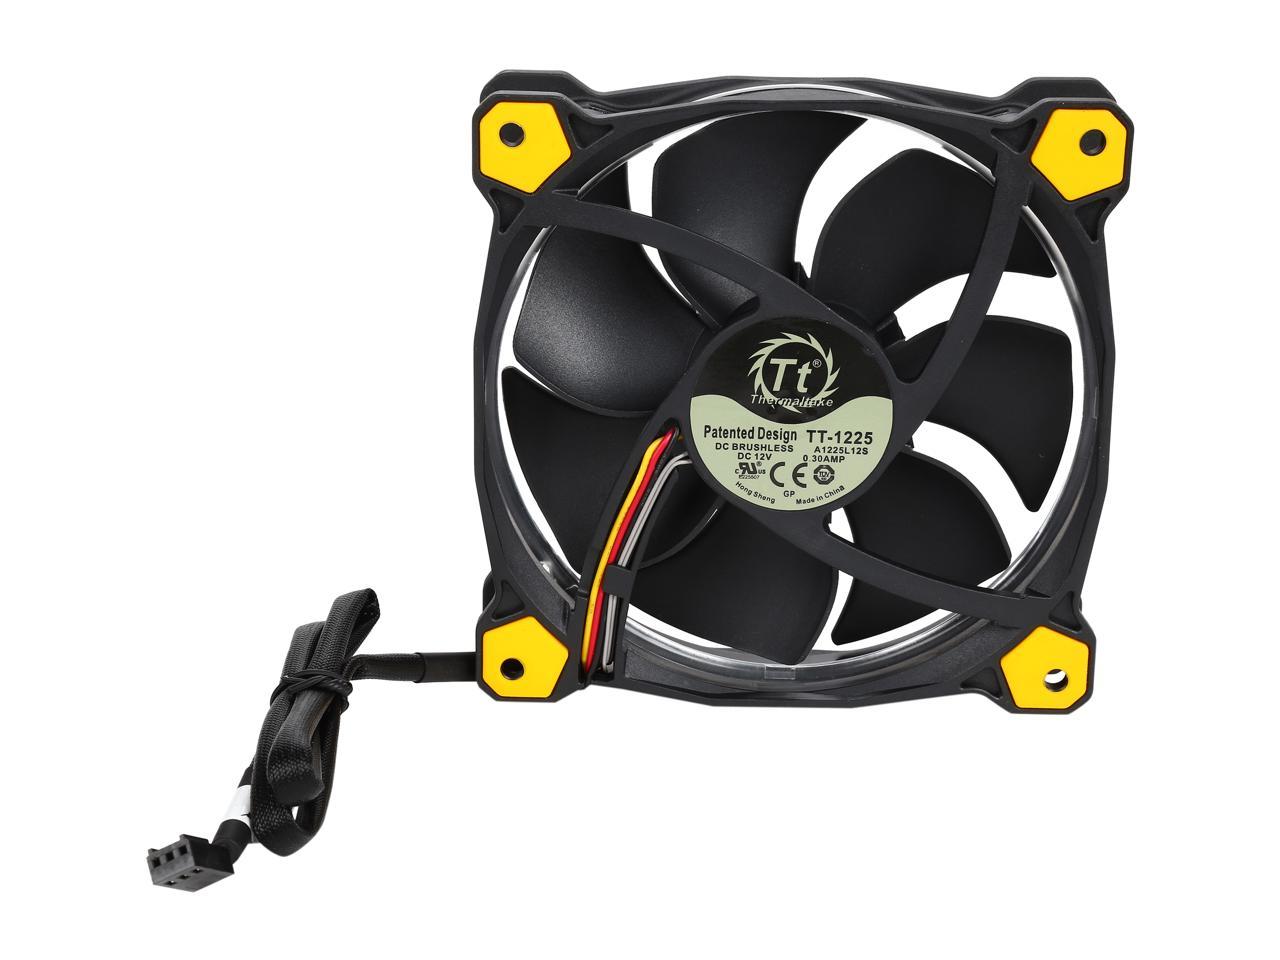 Thermaltake Riing 12 Series High Static Pressure 120mm Circular Yellow LED Ring Case/Radiator Fan CL-F038-PL12YL-A